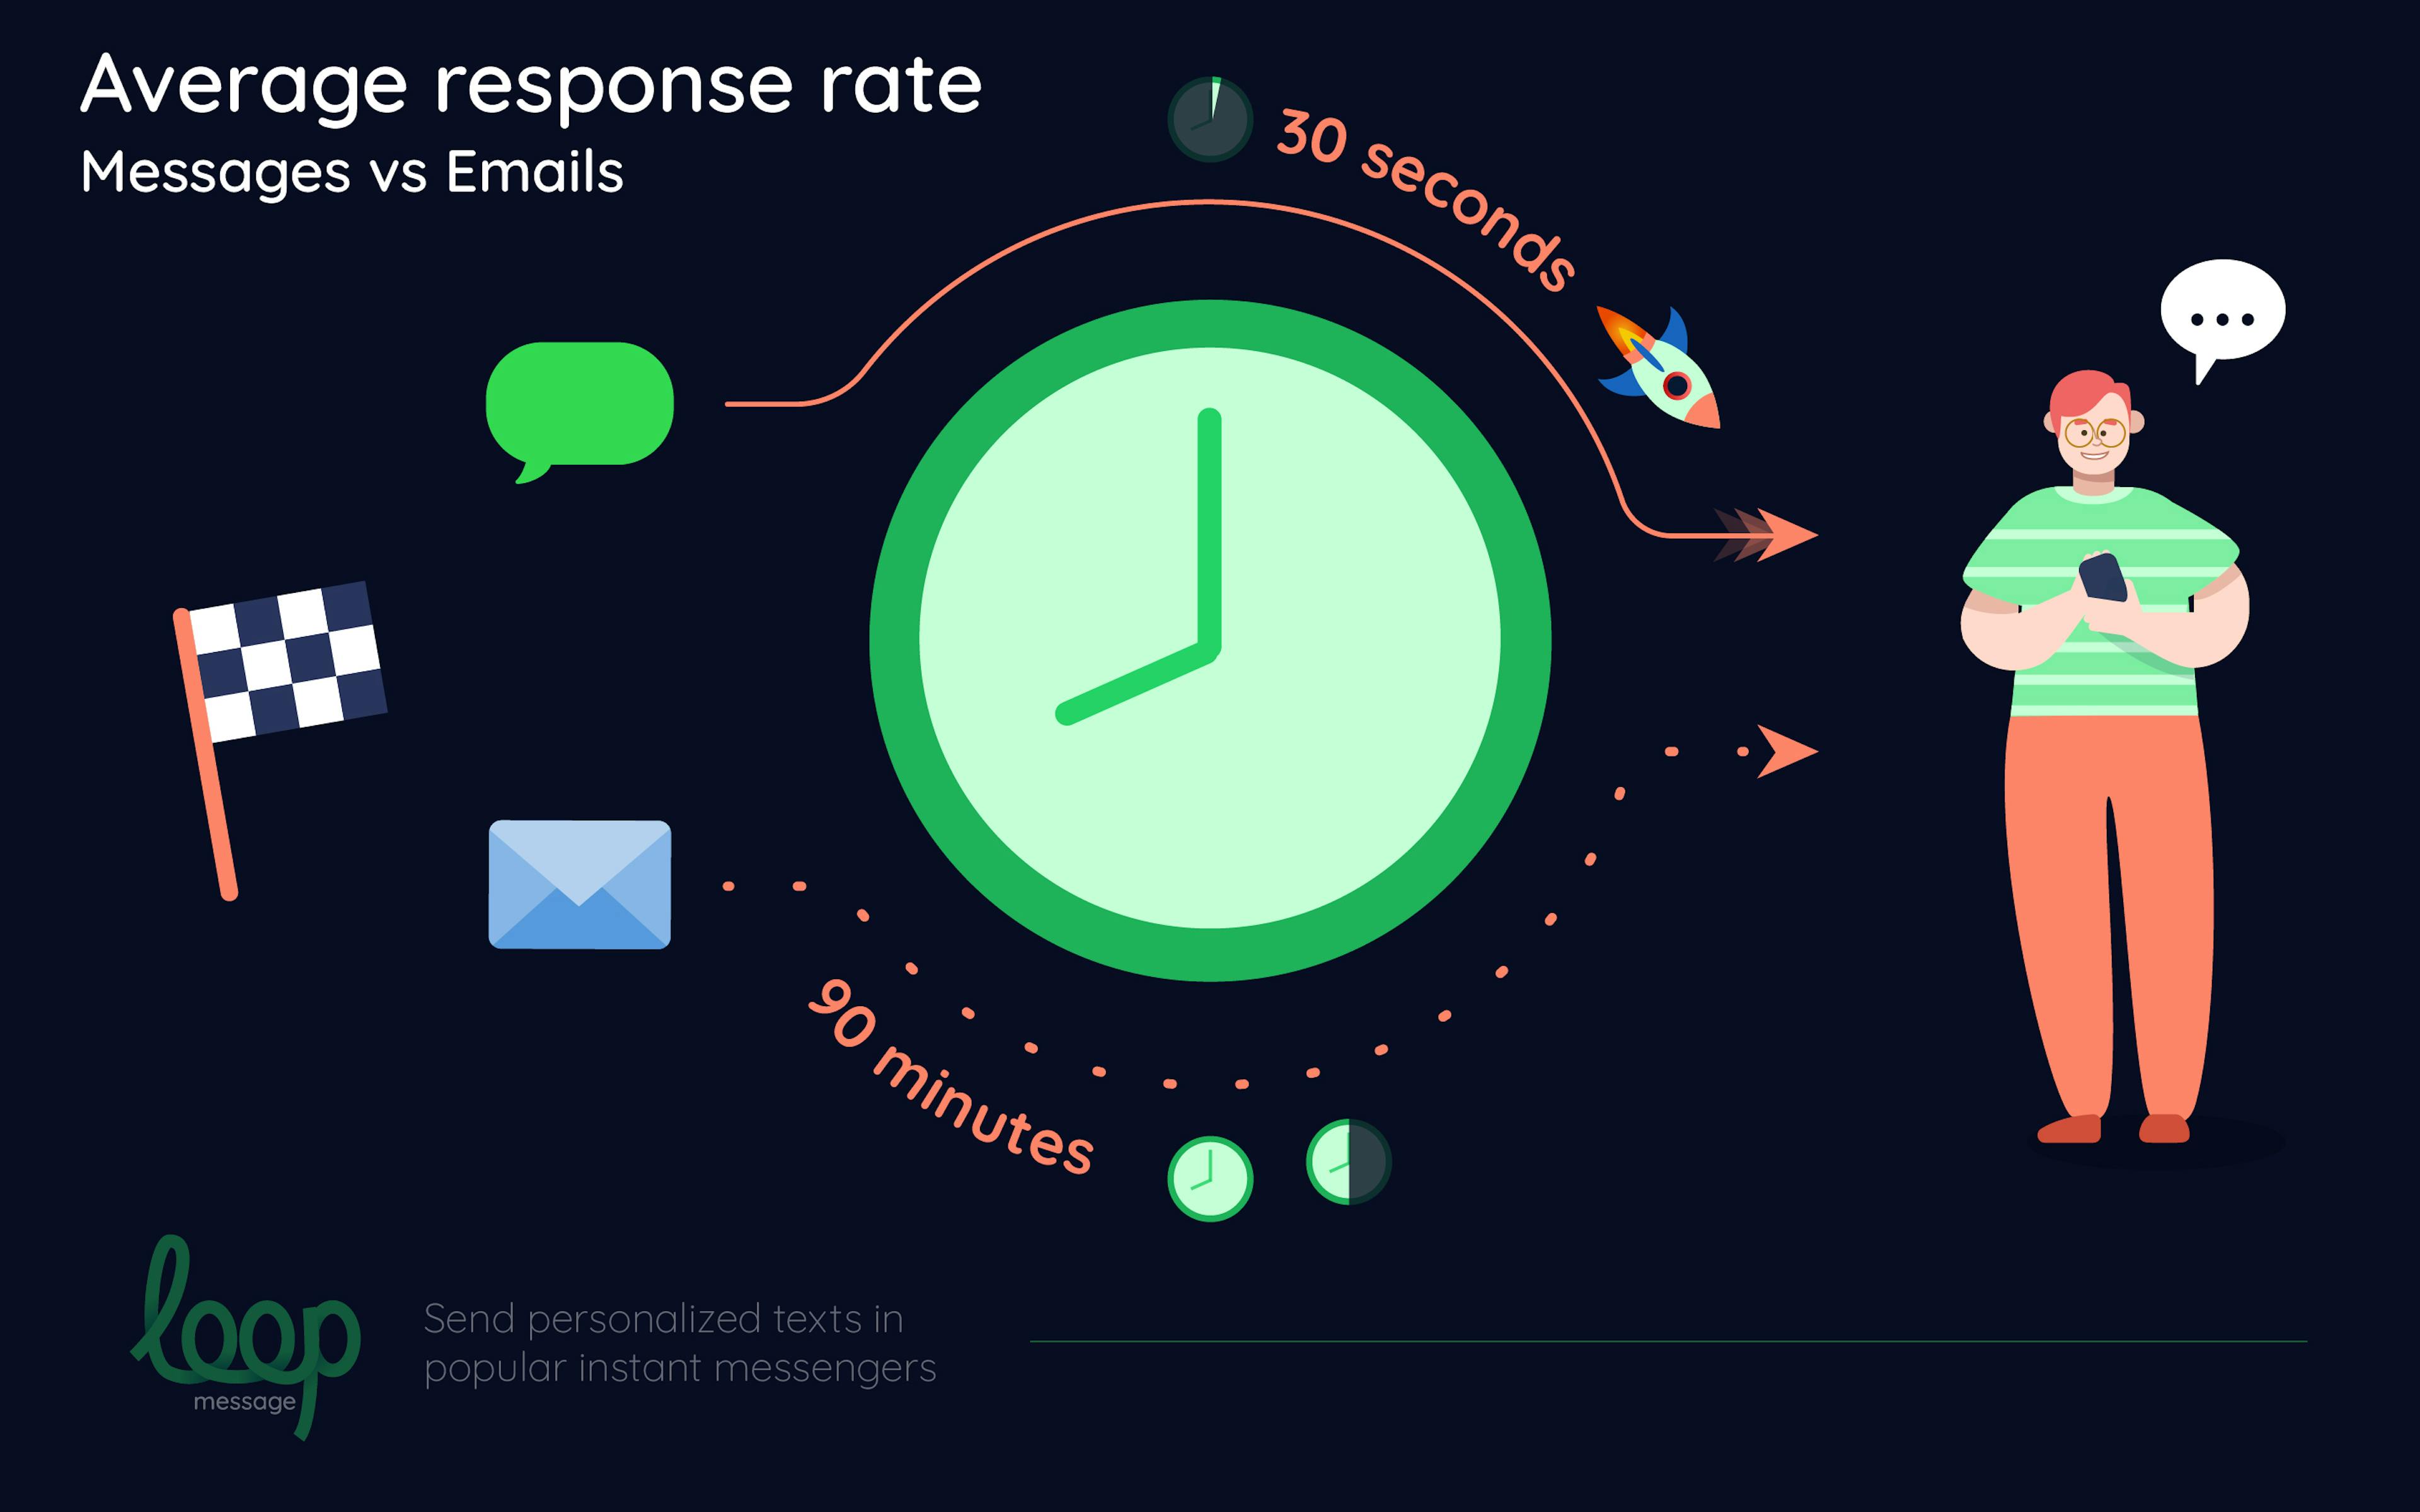 Average response rate (Messages vs. Emails)